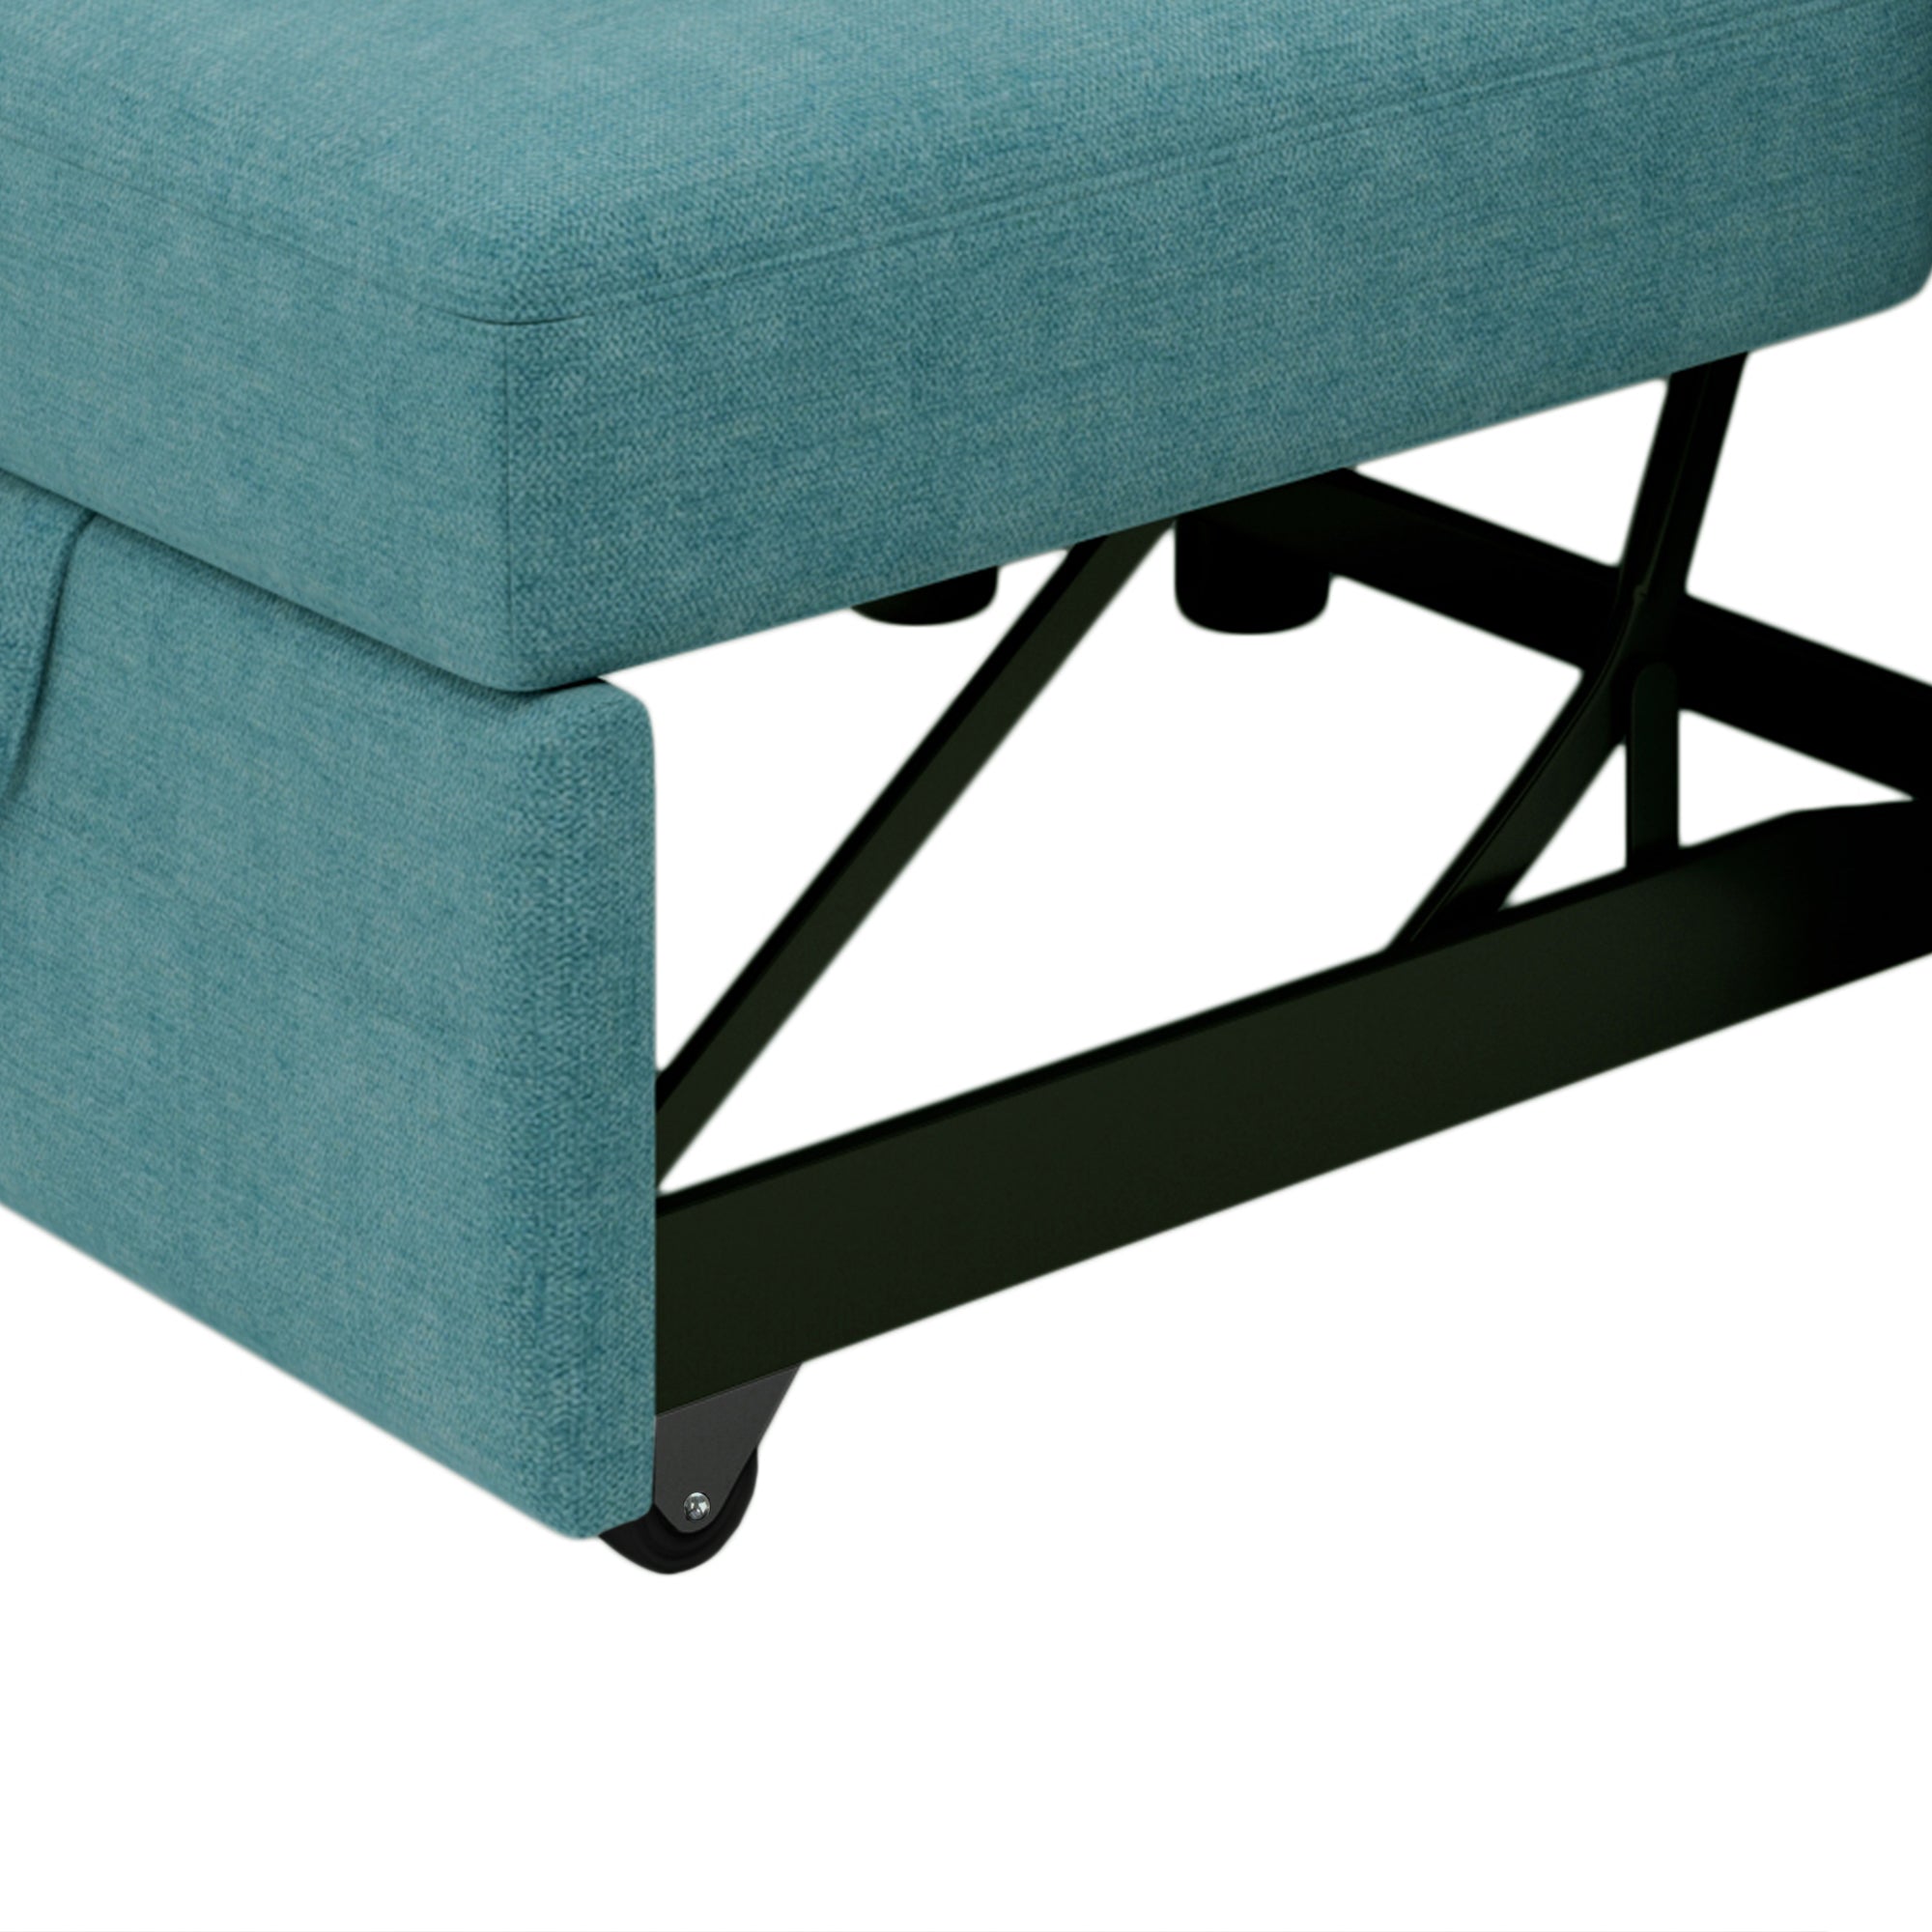 3 in 1 Sofa Bed Chair, Convertible Sleeper Chair teal-linen